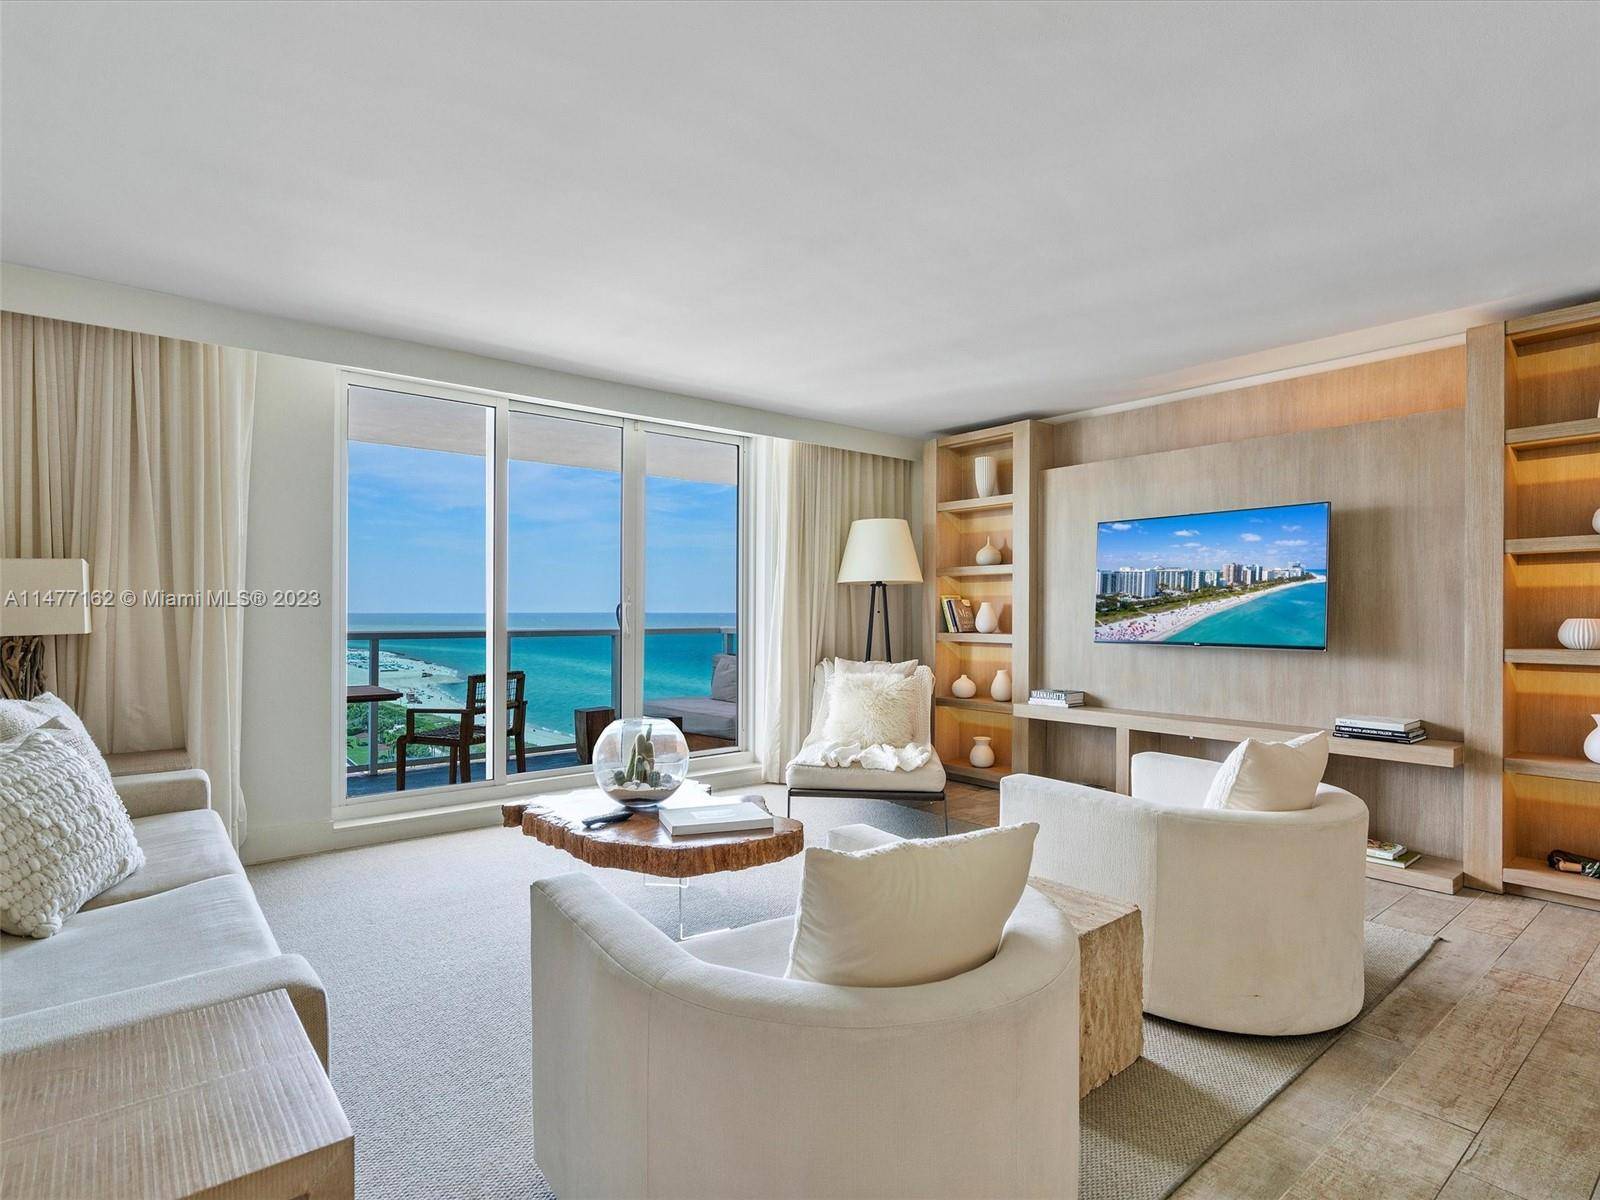 Discover the epitome of 5 star living in this luxurious oceanfront condo at 1 Hotel Homes.